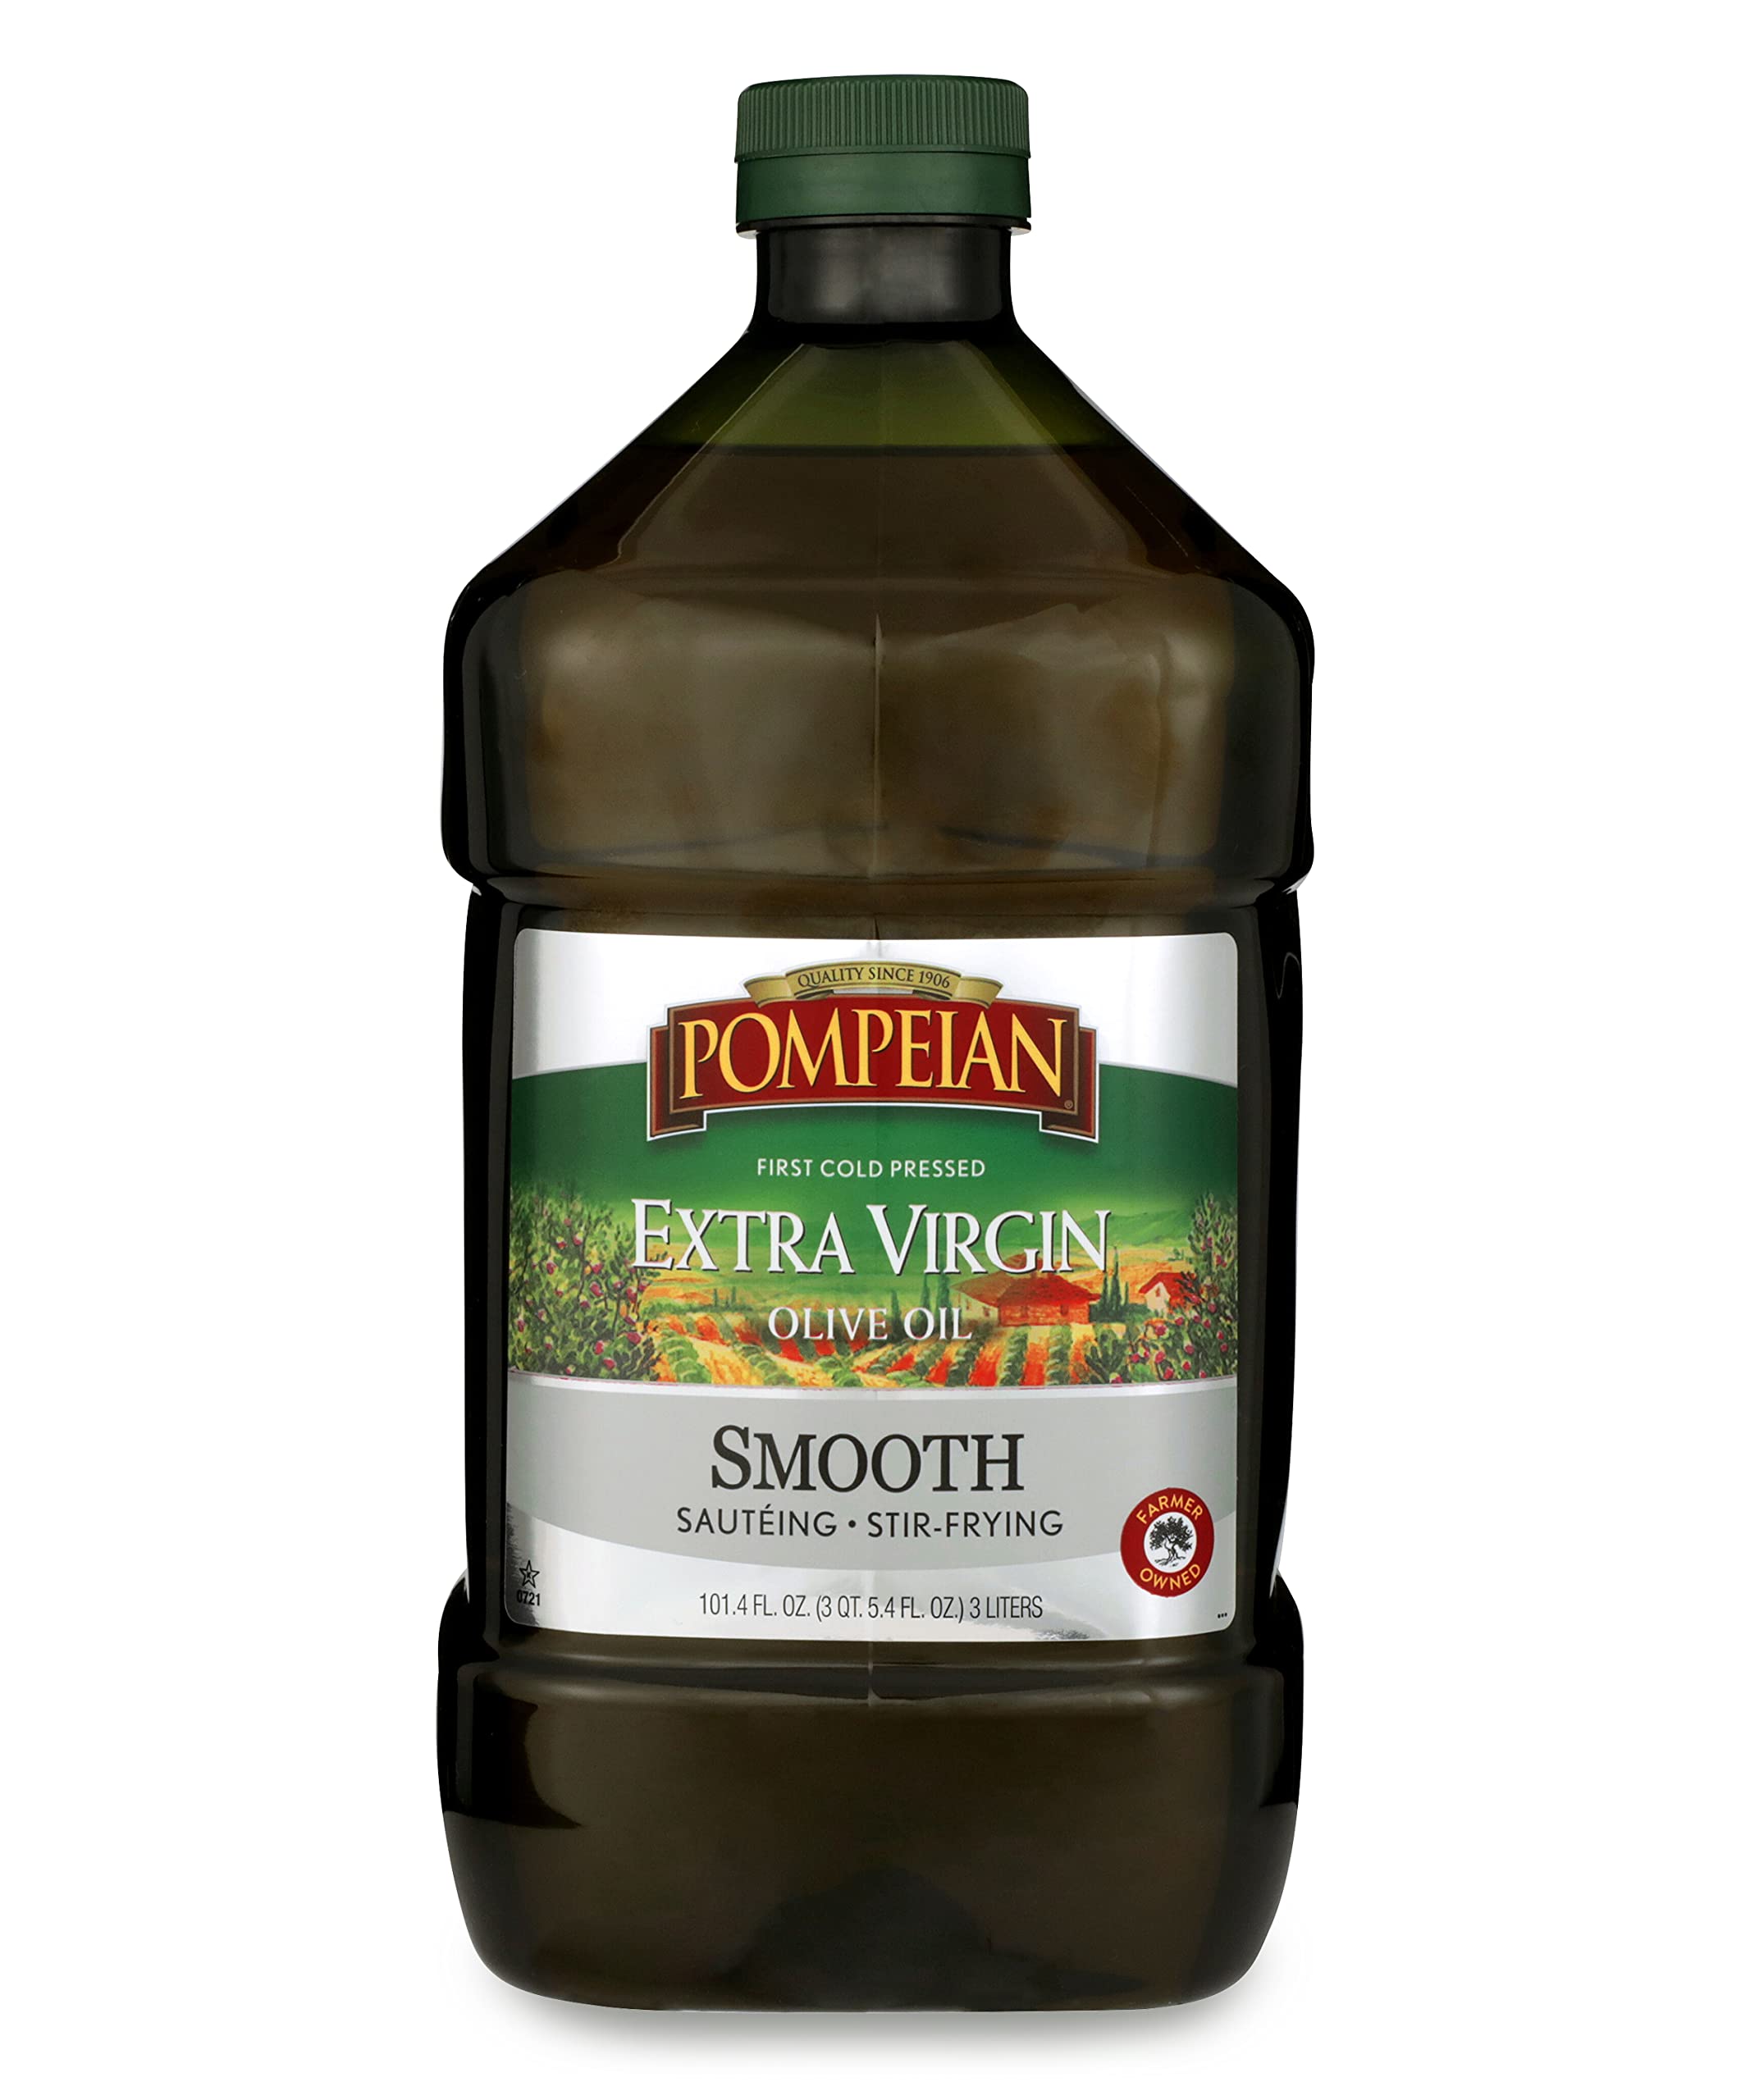 Pompeian Smooth Extra Virgin Olive Oil, First Cold Pressed, Mild and Delicate Flavor, Perfect for Sauteing and Stir-Frying,Non-GMO, 101 Fl Oz $22